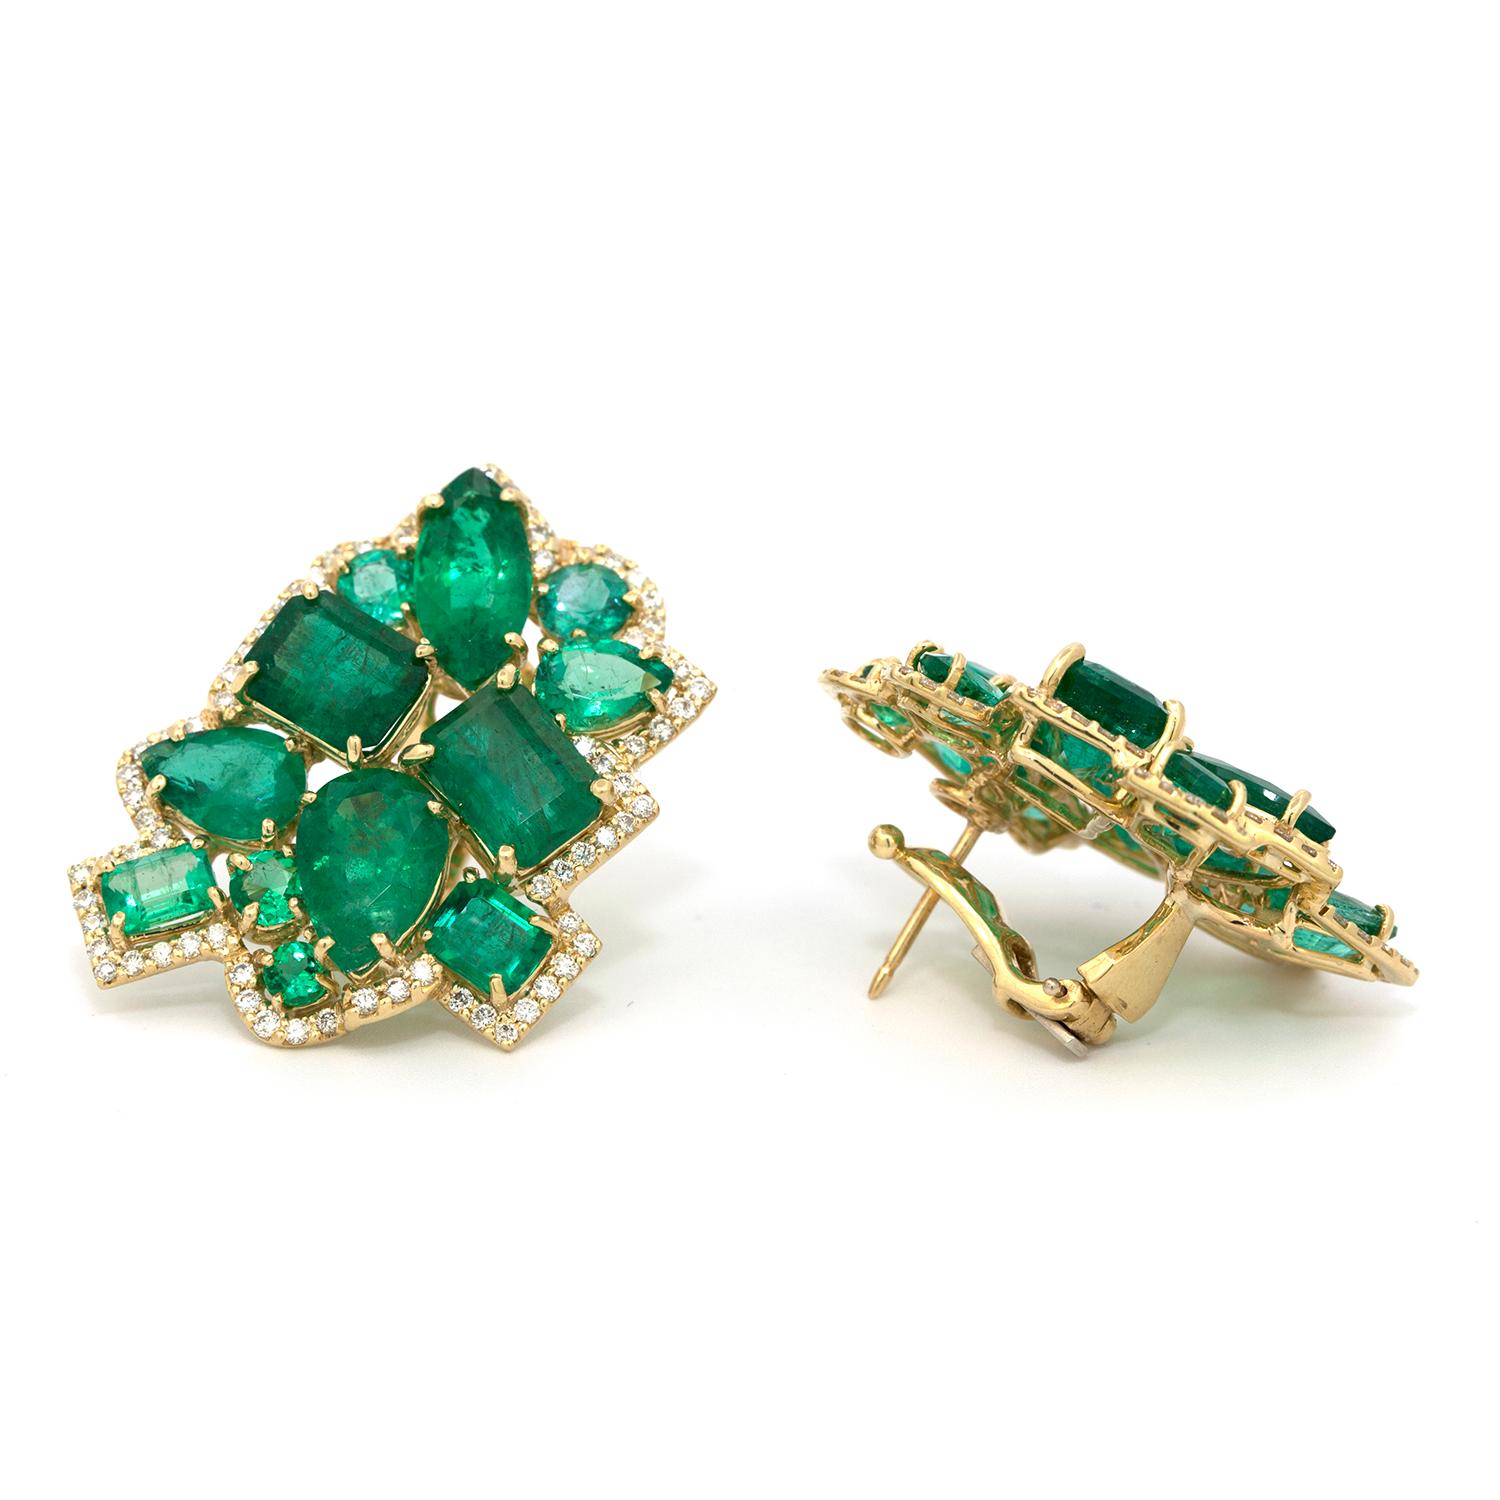 French Clip Earrings, set with 22 mixed shaped, faceted, vintage emeralds,  in a modern classic 18k yellow gold earrings, that are outlined with 147 micro pave’ set diamonds that strengthen the geometric symmetry created by the multi shaped and